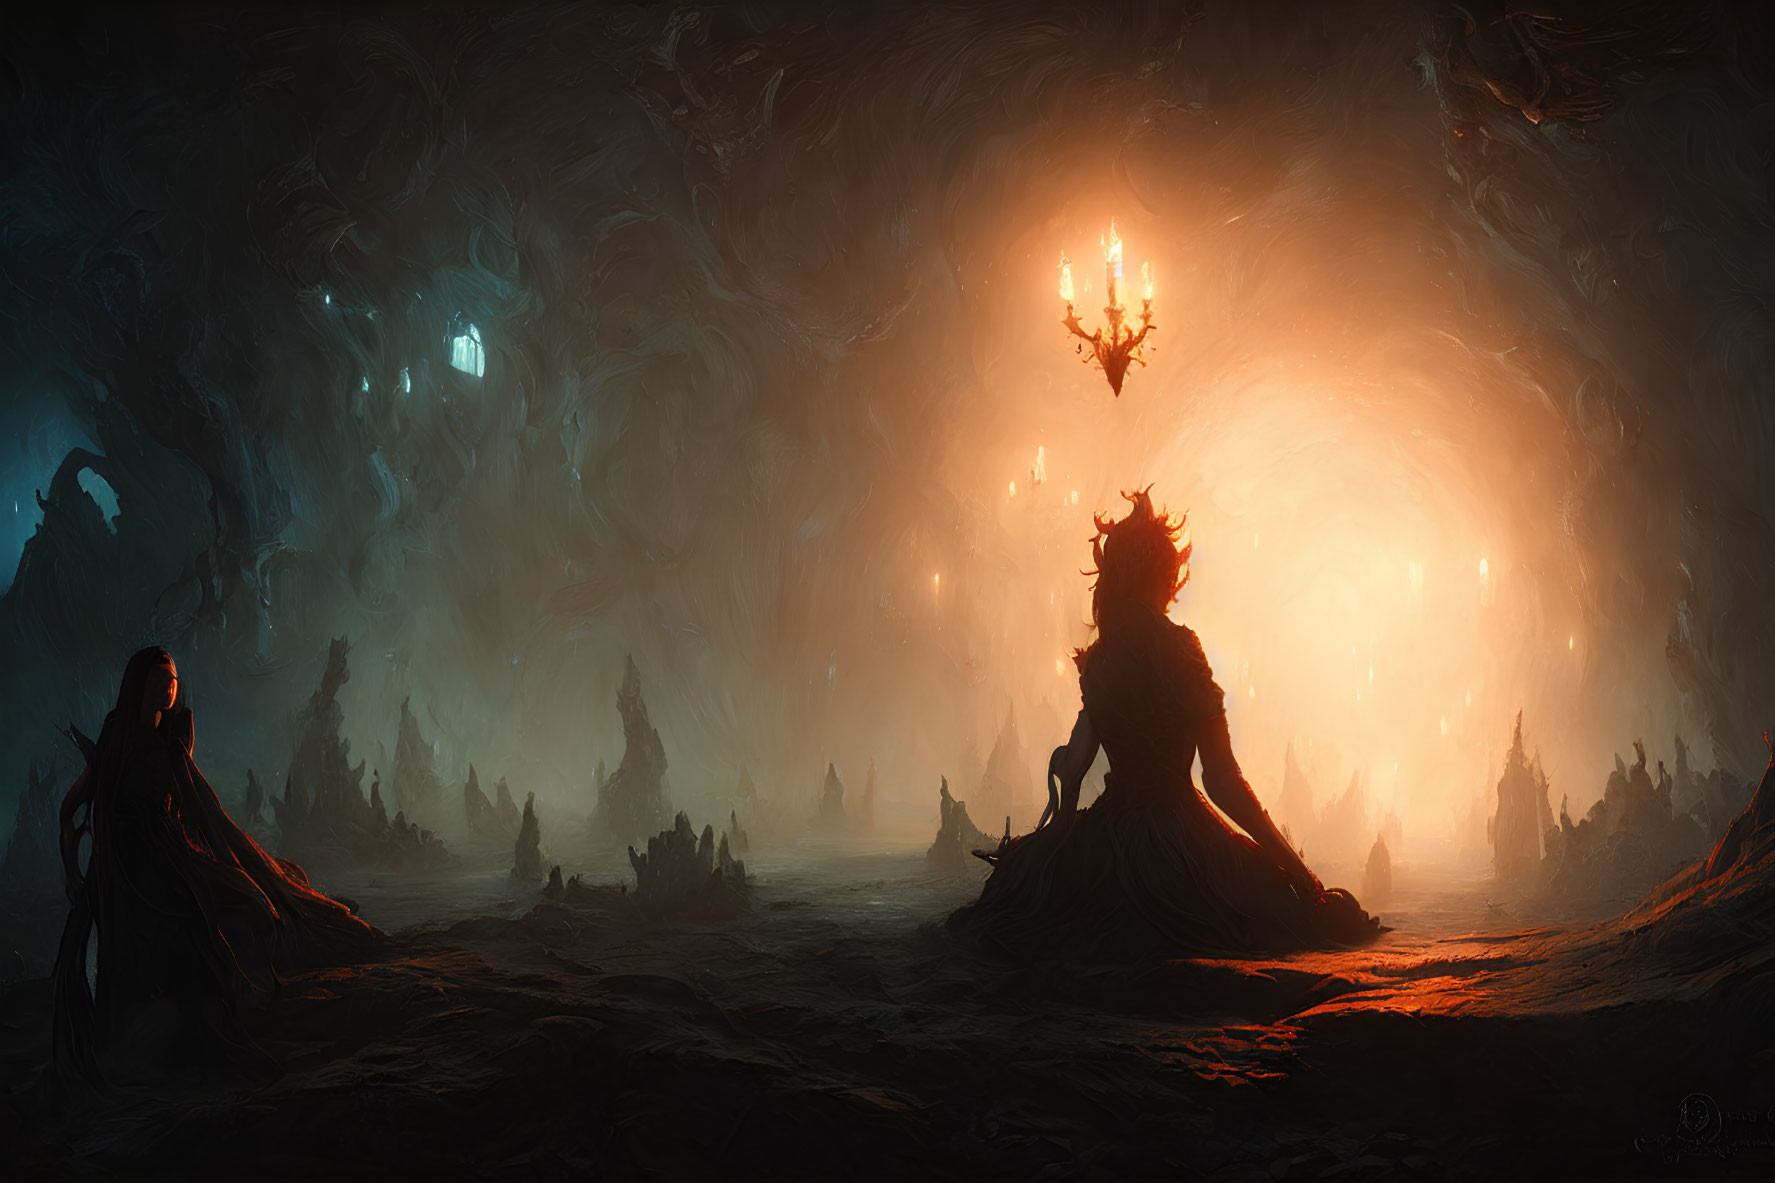 Dark fantasy scene with cloaked figure, regal entity, eerie trees, and mysterious light.